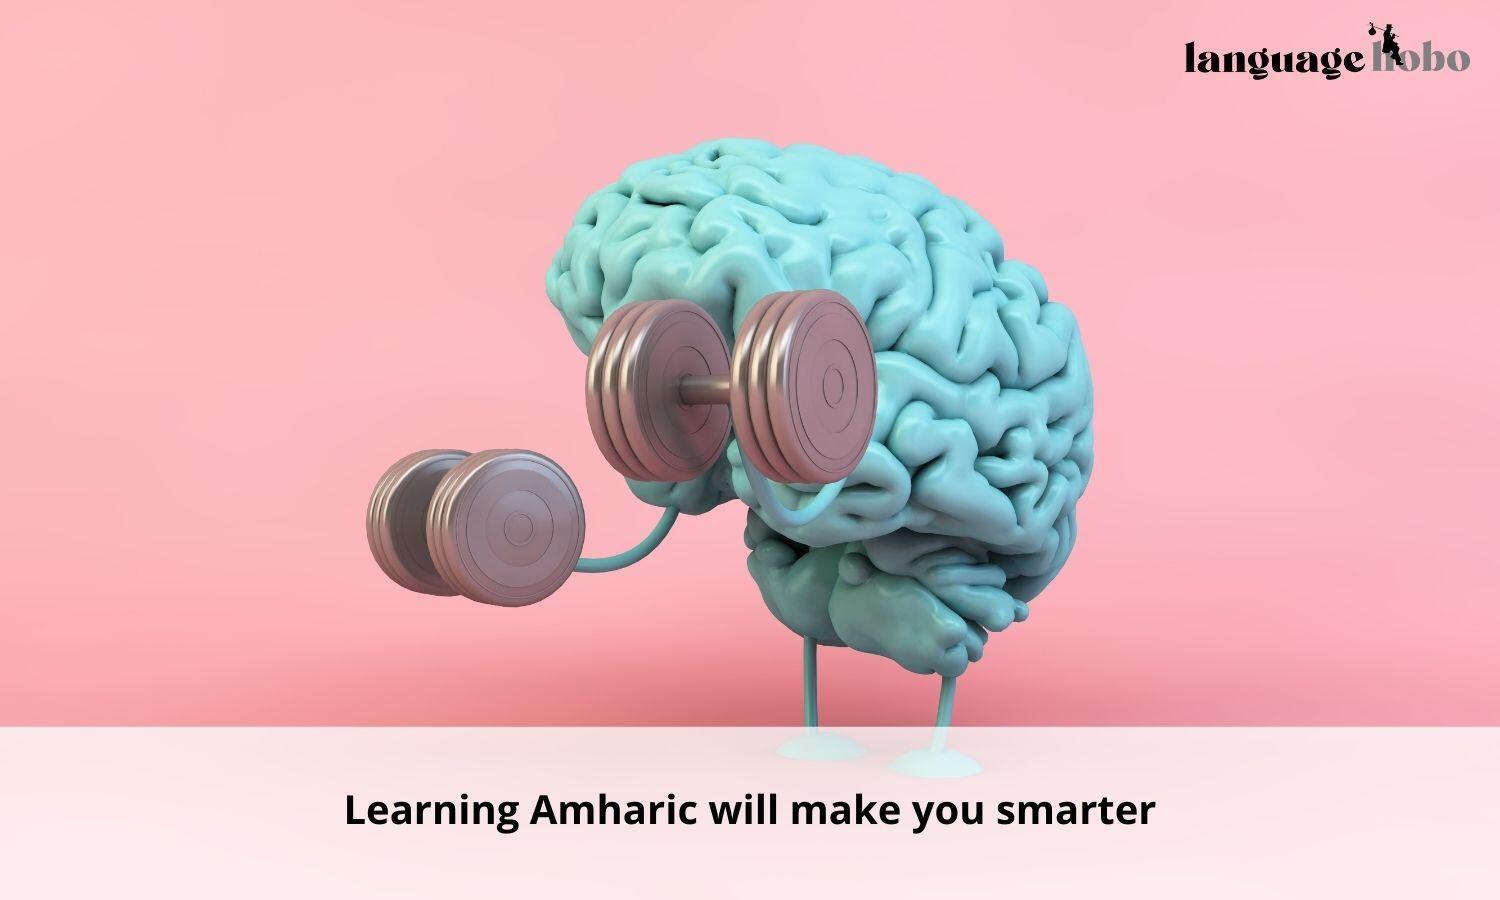 Learning amharic makes you smarter